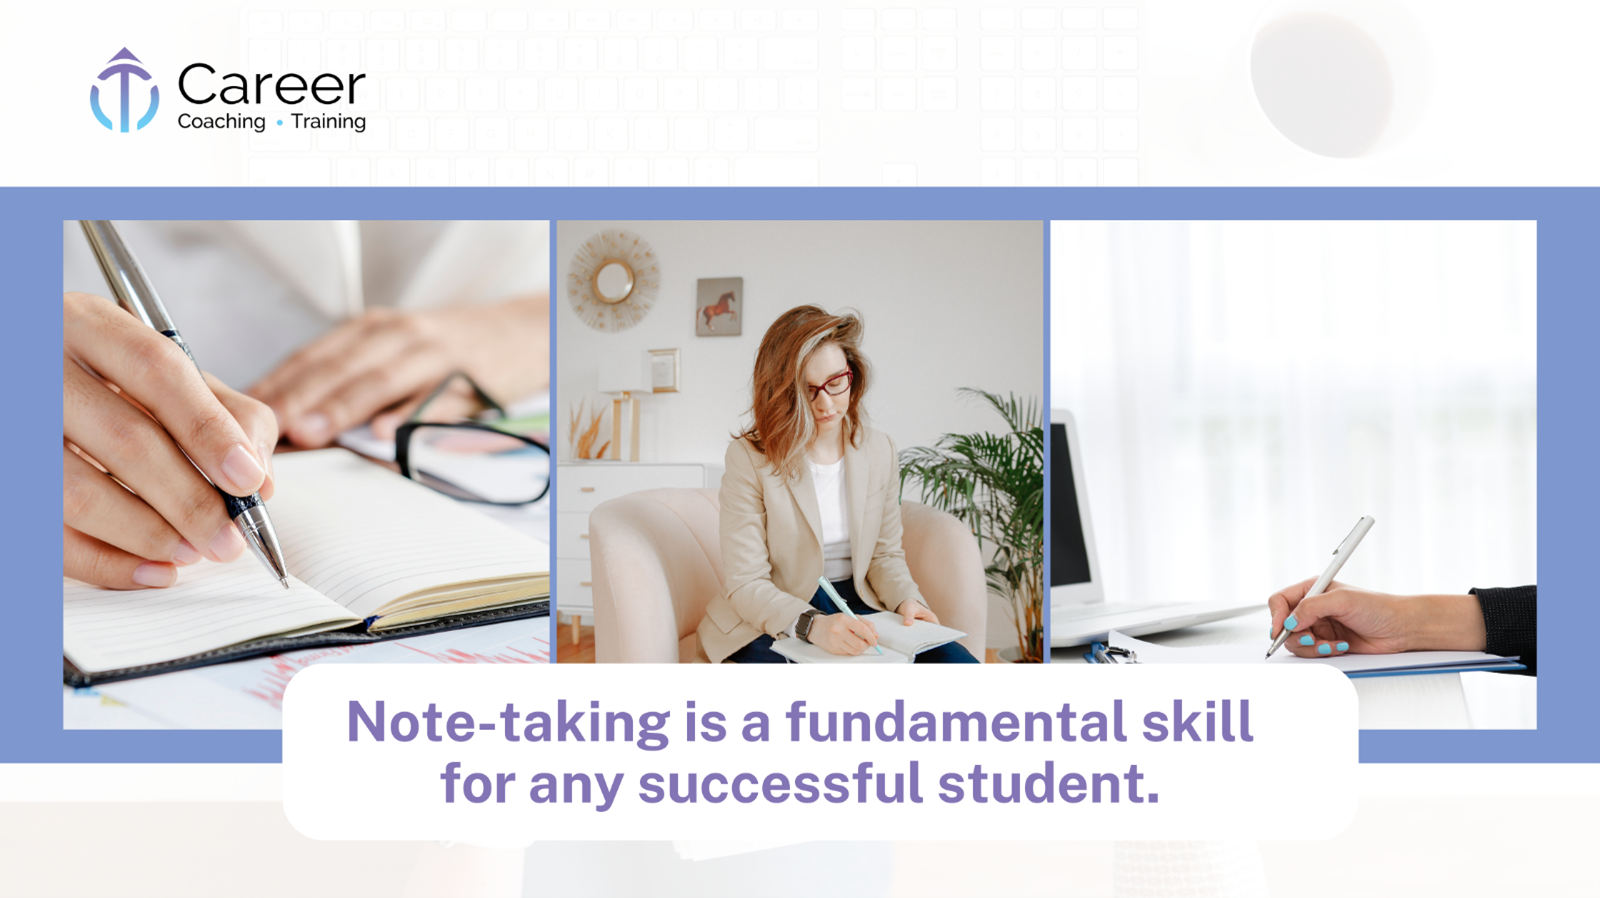 Note-taking is a fundamental skill for any successful student.